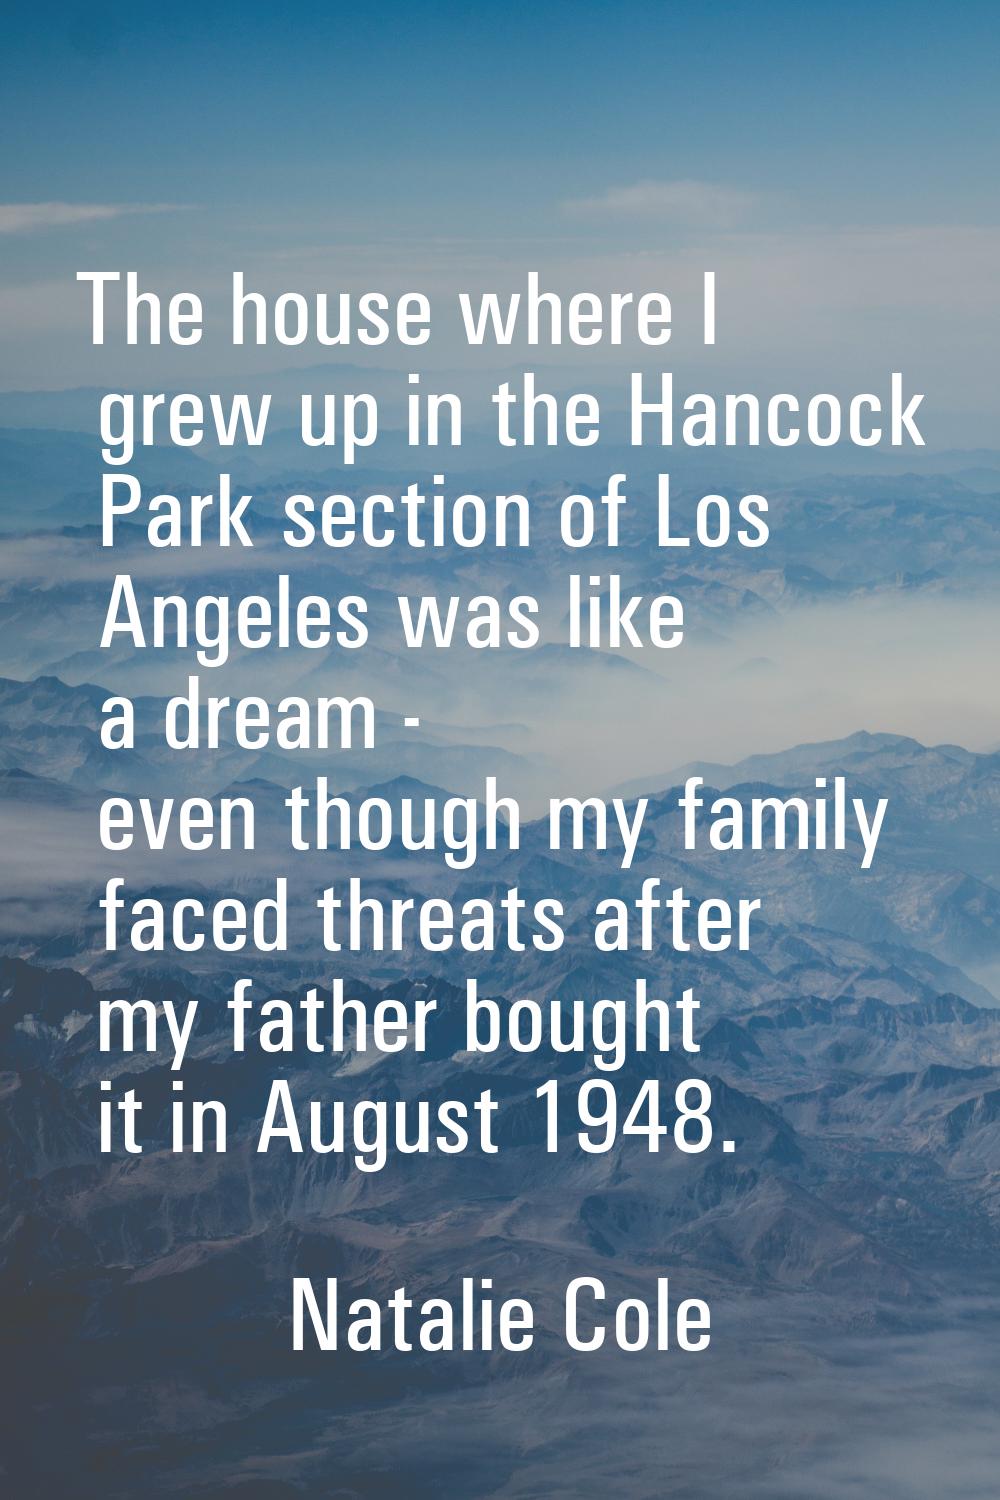 The house where I grew up in the Hancock Park section of Los Angeles was like a dream - even though